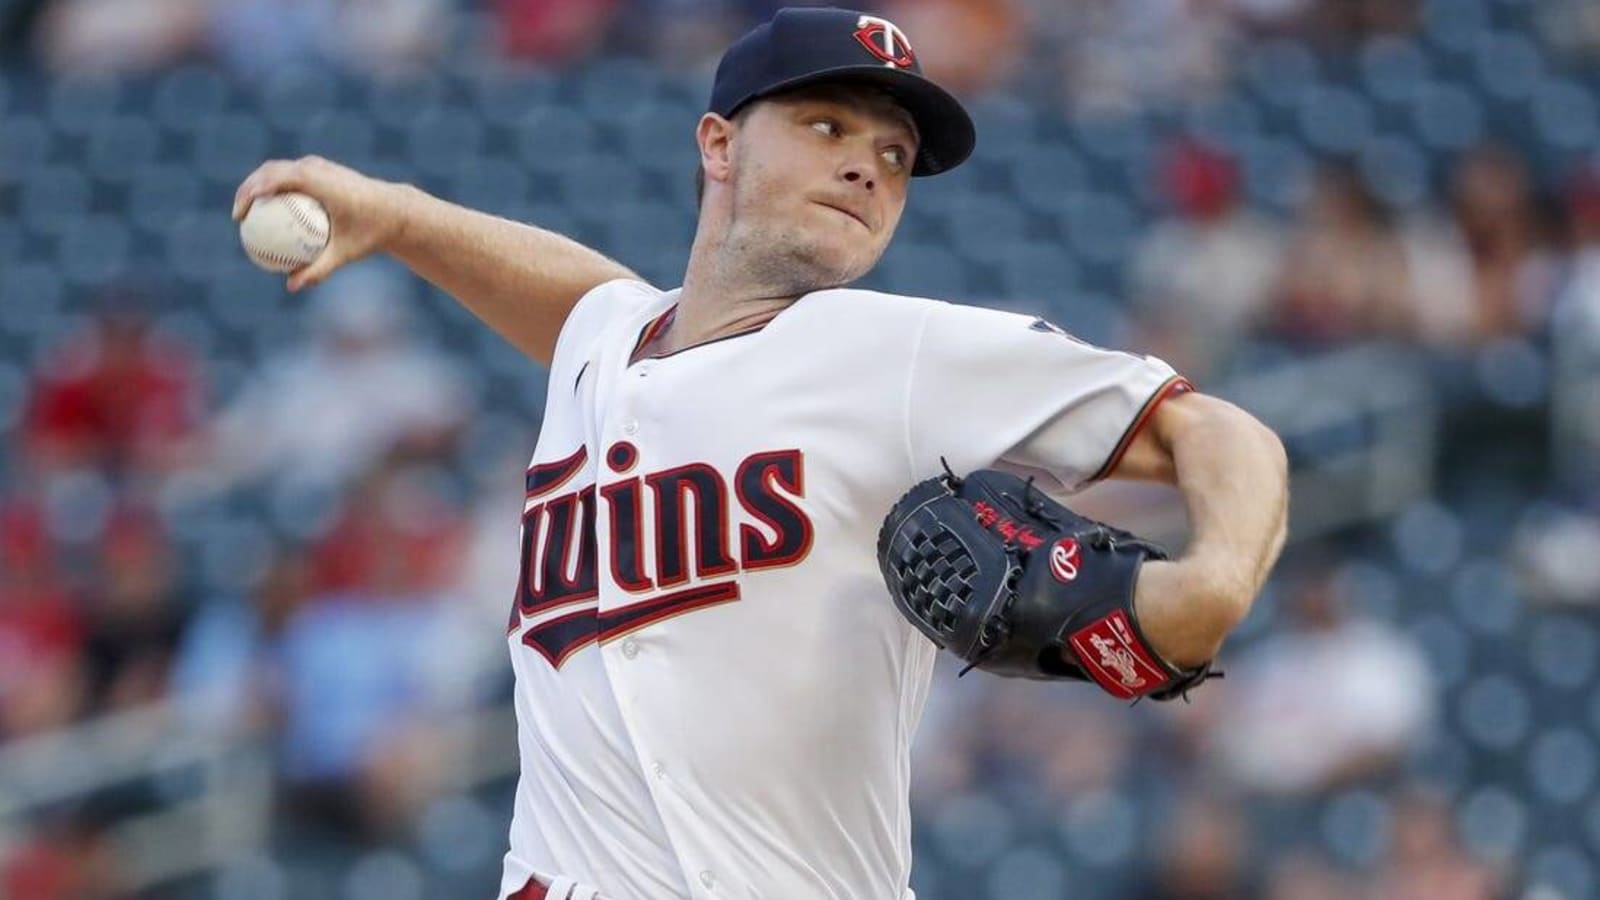 Texas Rangers vs. Minnesota Twins prediction and odds Mon., 8/22: Sonny Gray looks for better outing